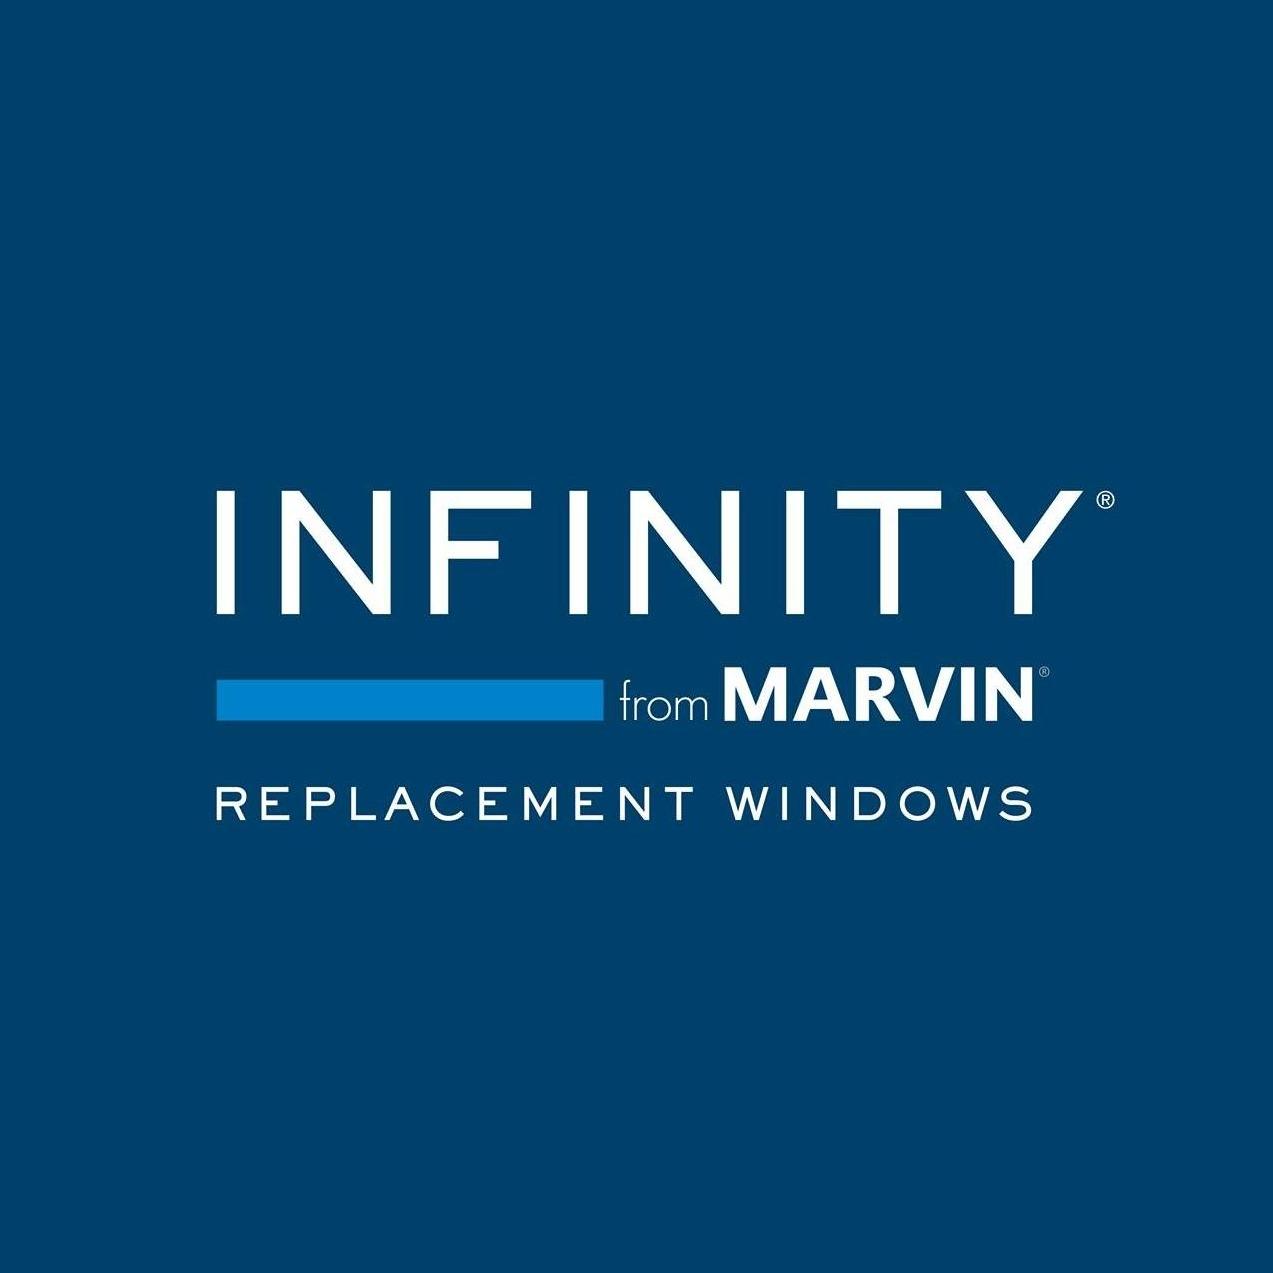 Infinity from Marvin - Cleveland Photo